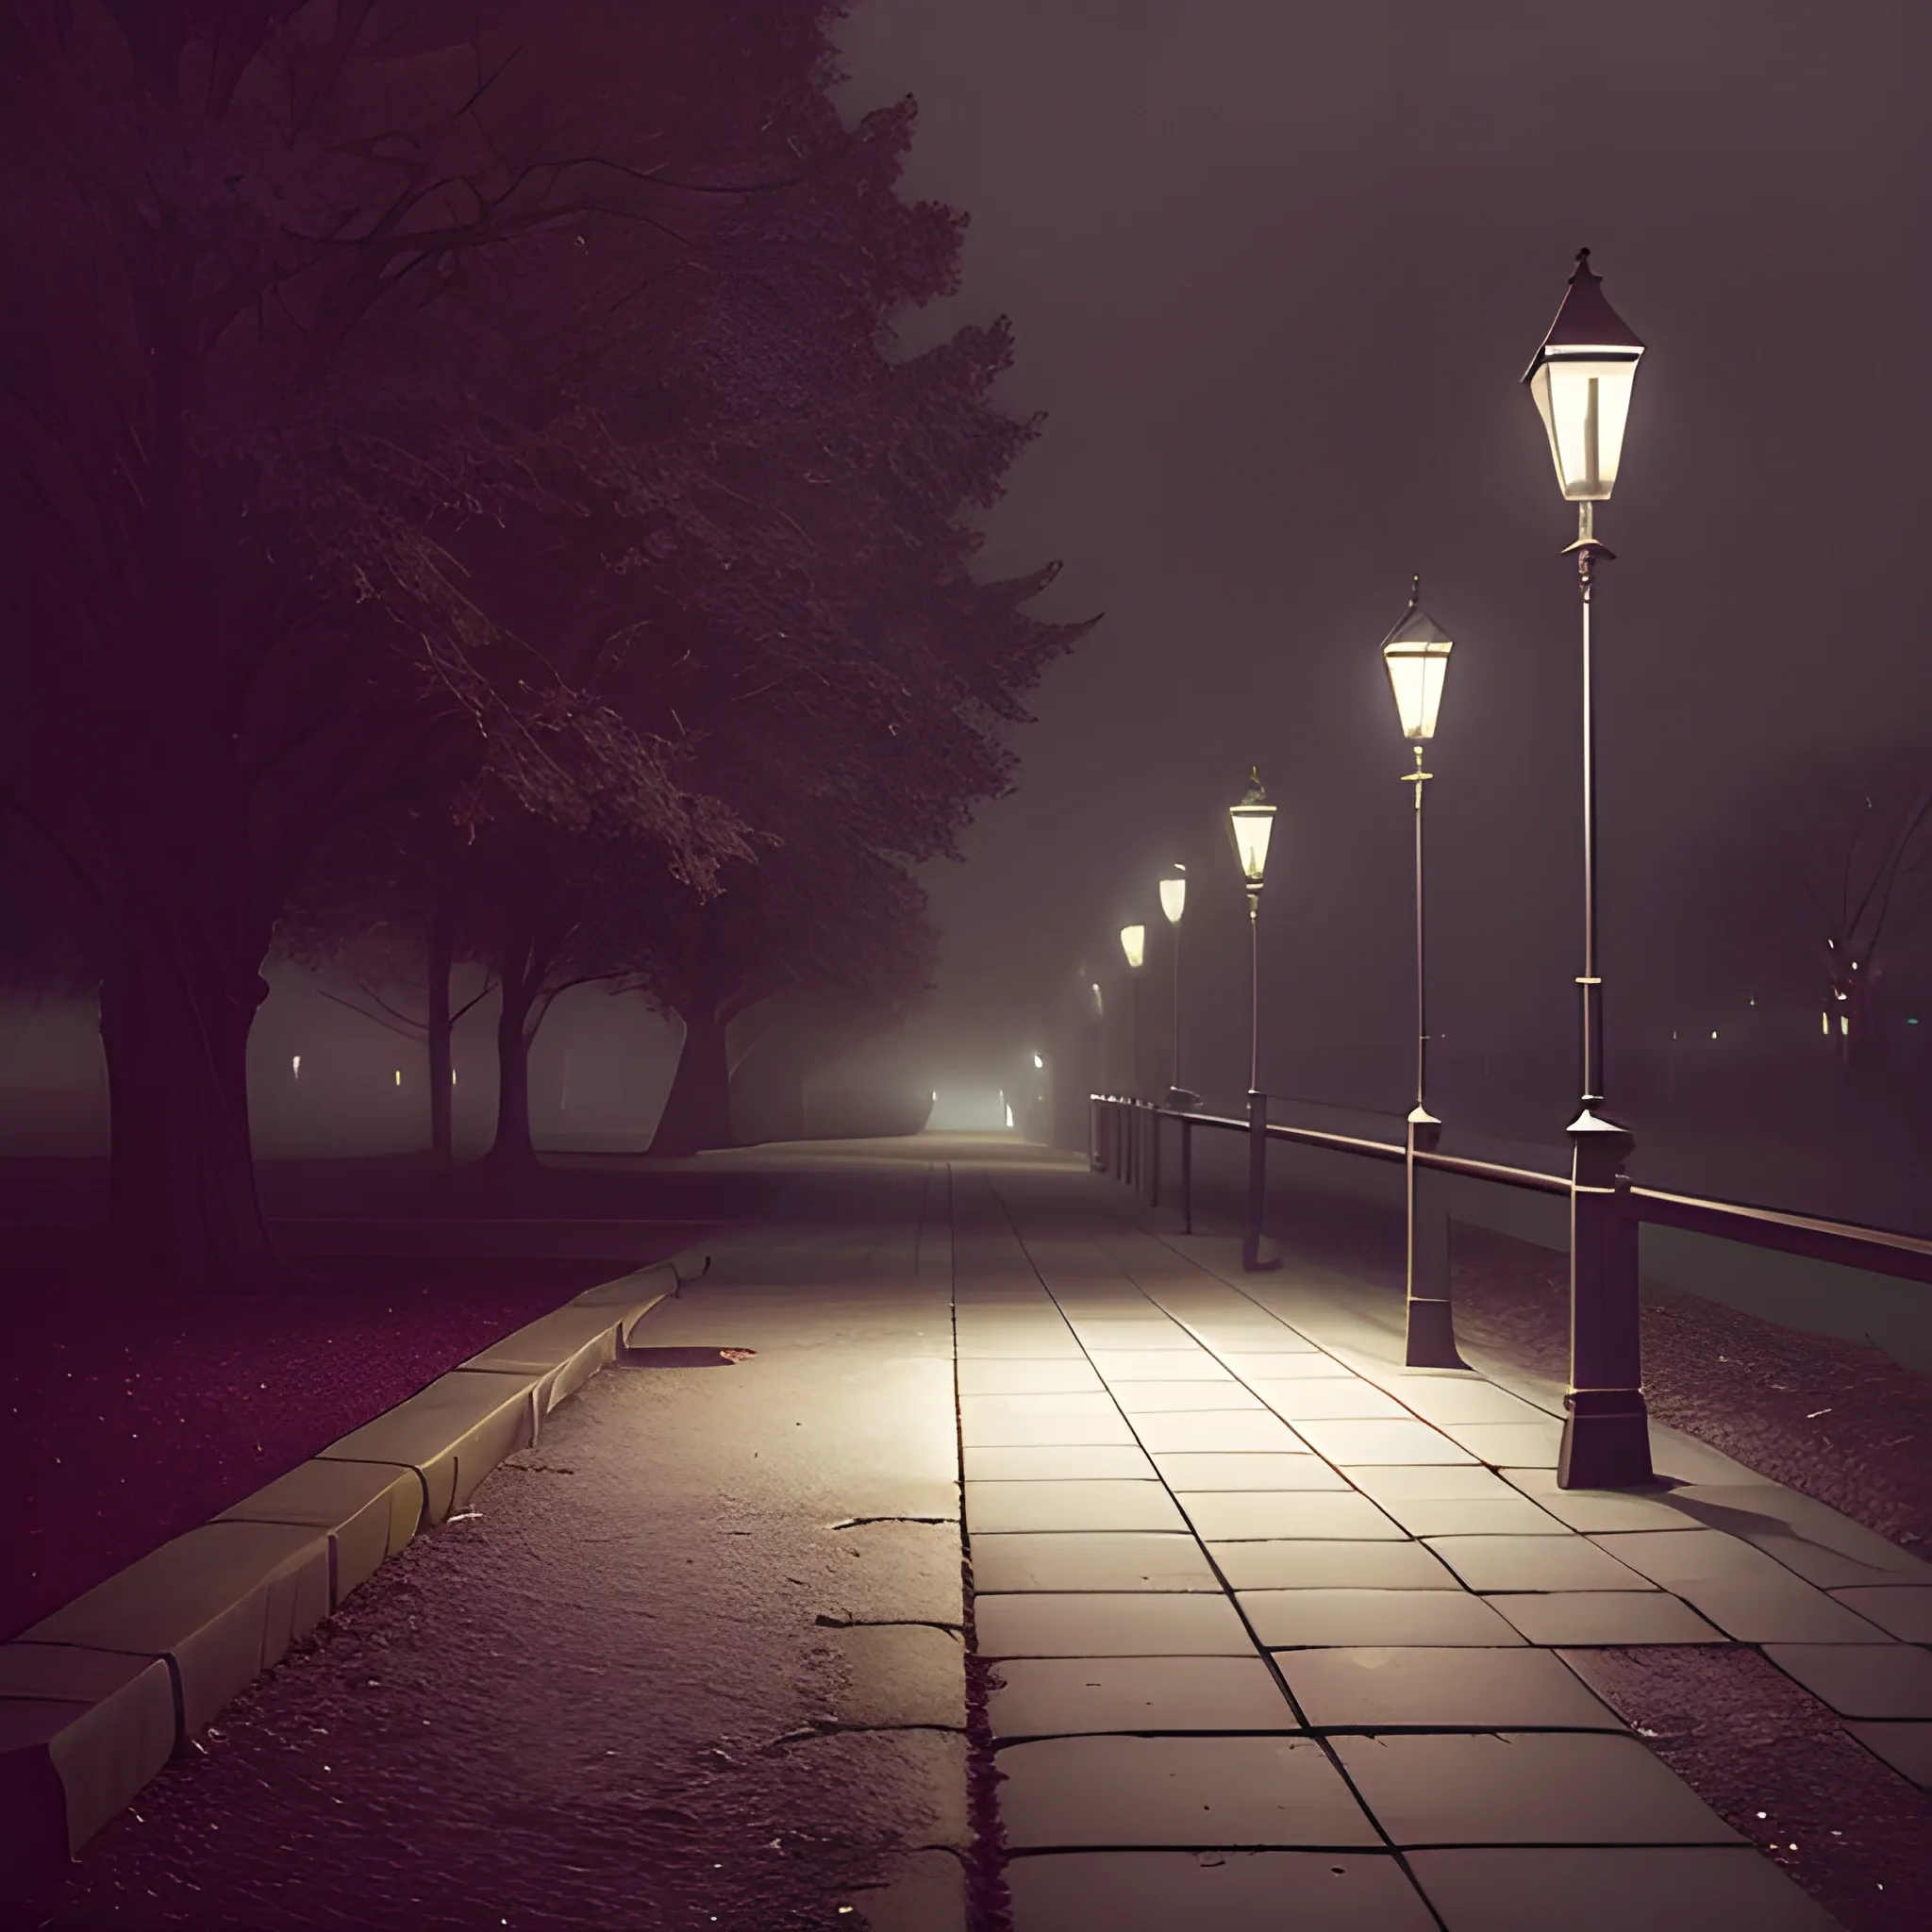 "Compose an evocative scene that embodies the melancholy of a night: Describe a solitary bench resting along a softly illuminated pathway, basked in the glow of a lone streetlight. The dance between intense shadows and the overcast heavens should conjure a feeling of poignant elegance that gently pulls at the emotions, the night enveloped in profound darkness."